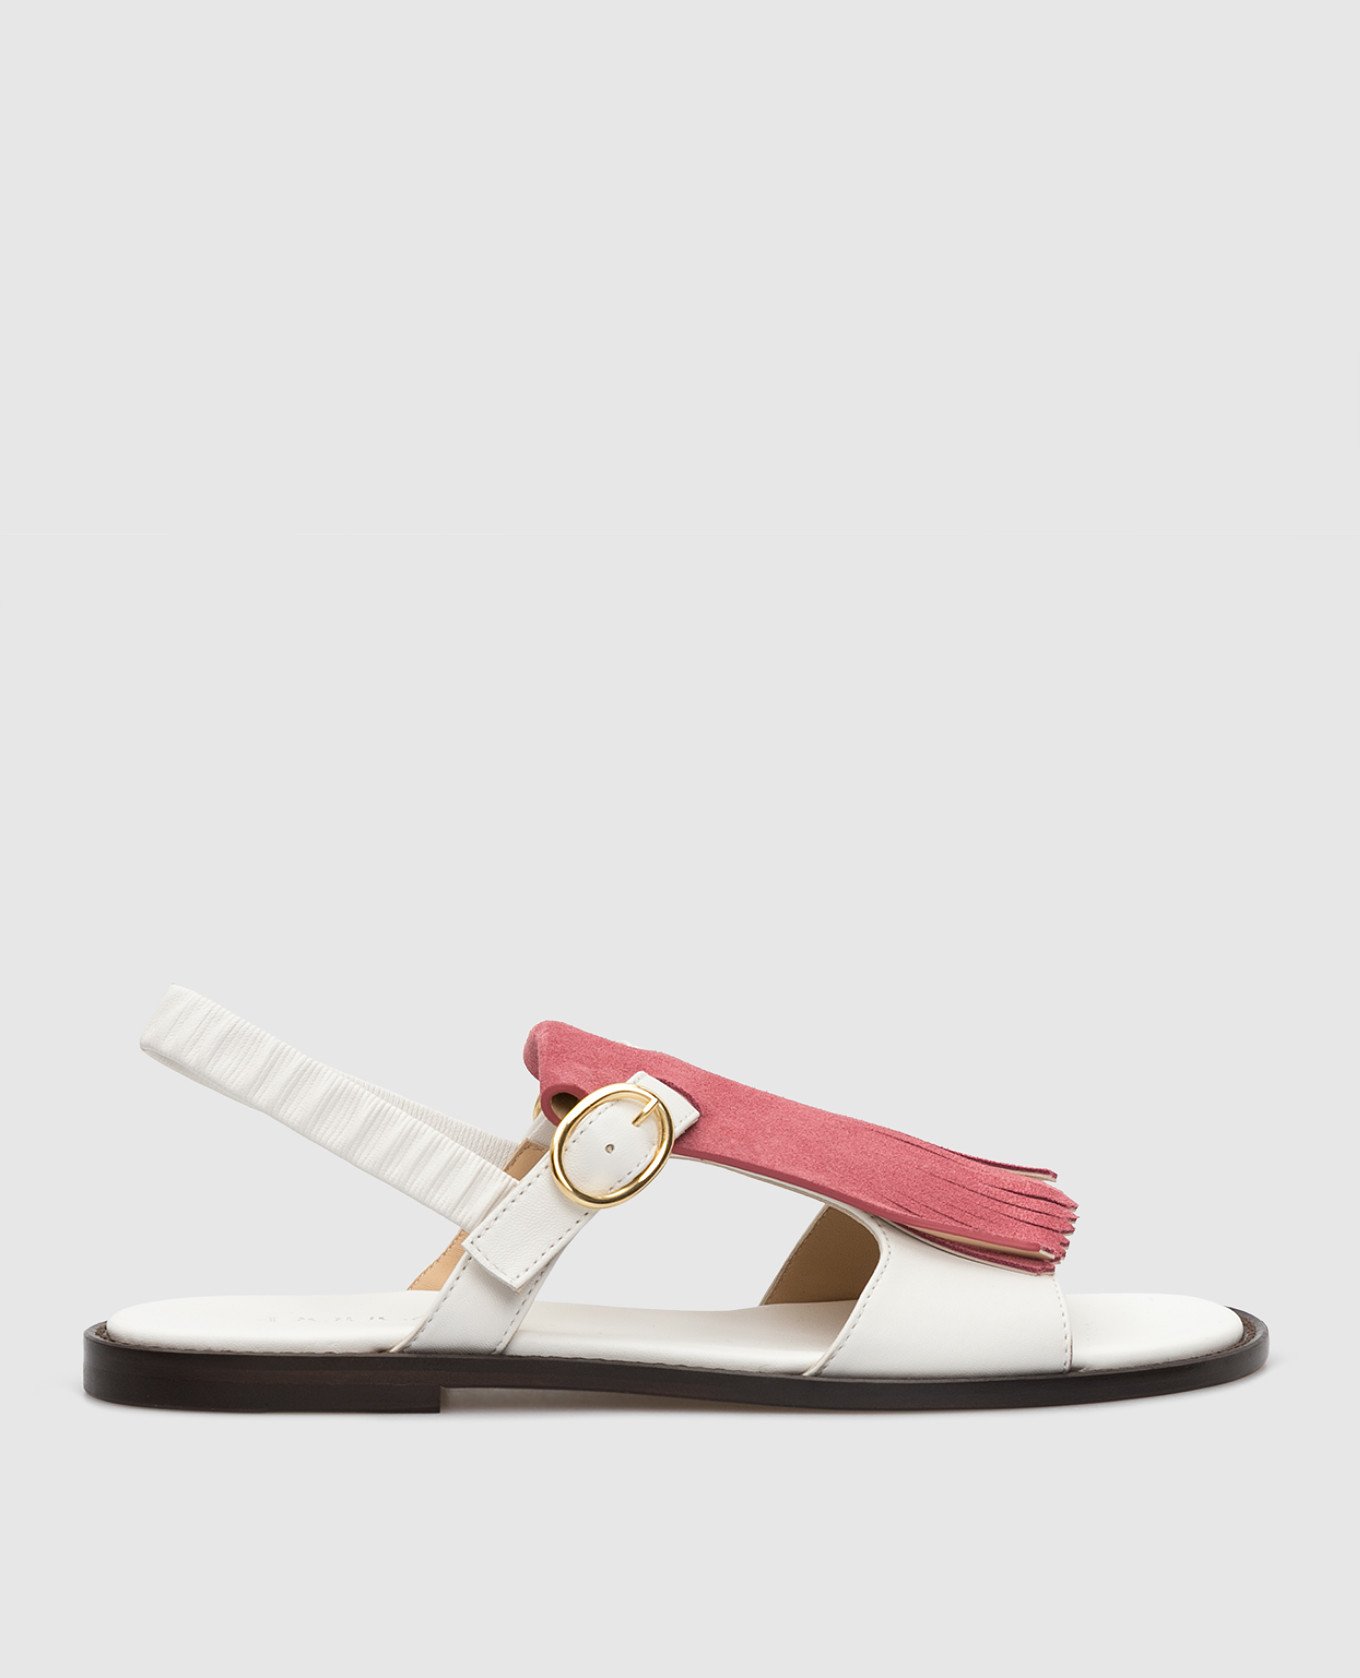 White Leather Sandals ChangeClear